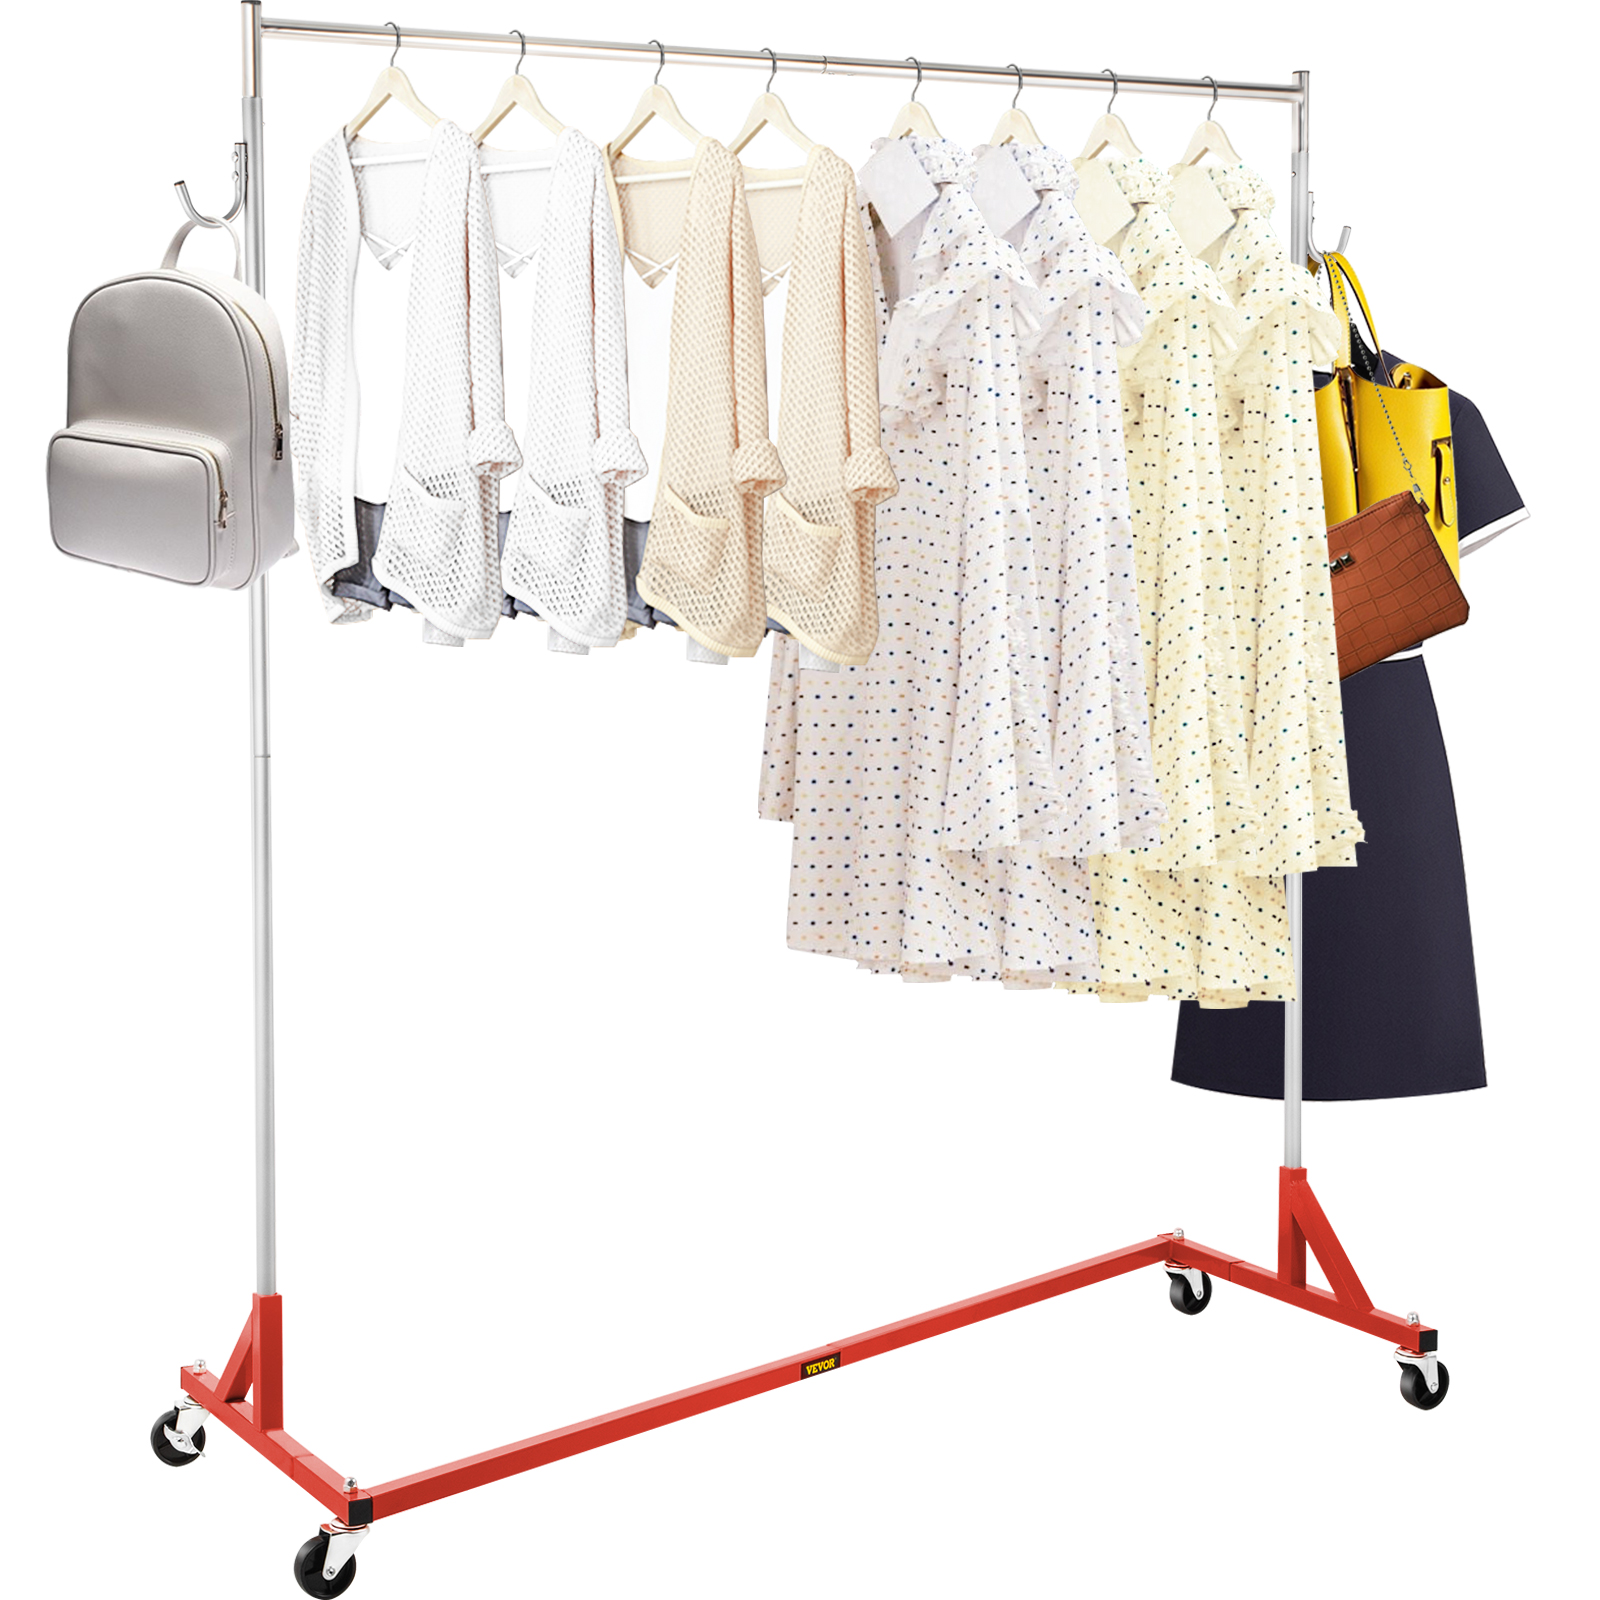 Home Solution Foldable Garment & Clothes Drying Rack, 2-Tier Adjustable  Height, 60 Garments, Stainless Steel, Sturdy 4 Legs, Wheels